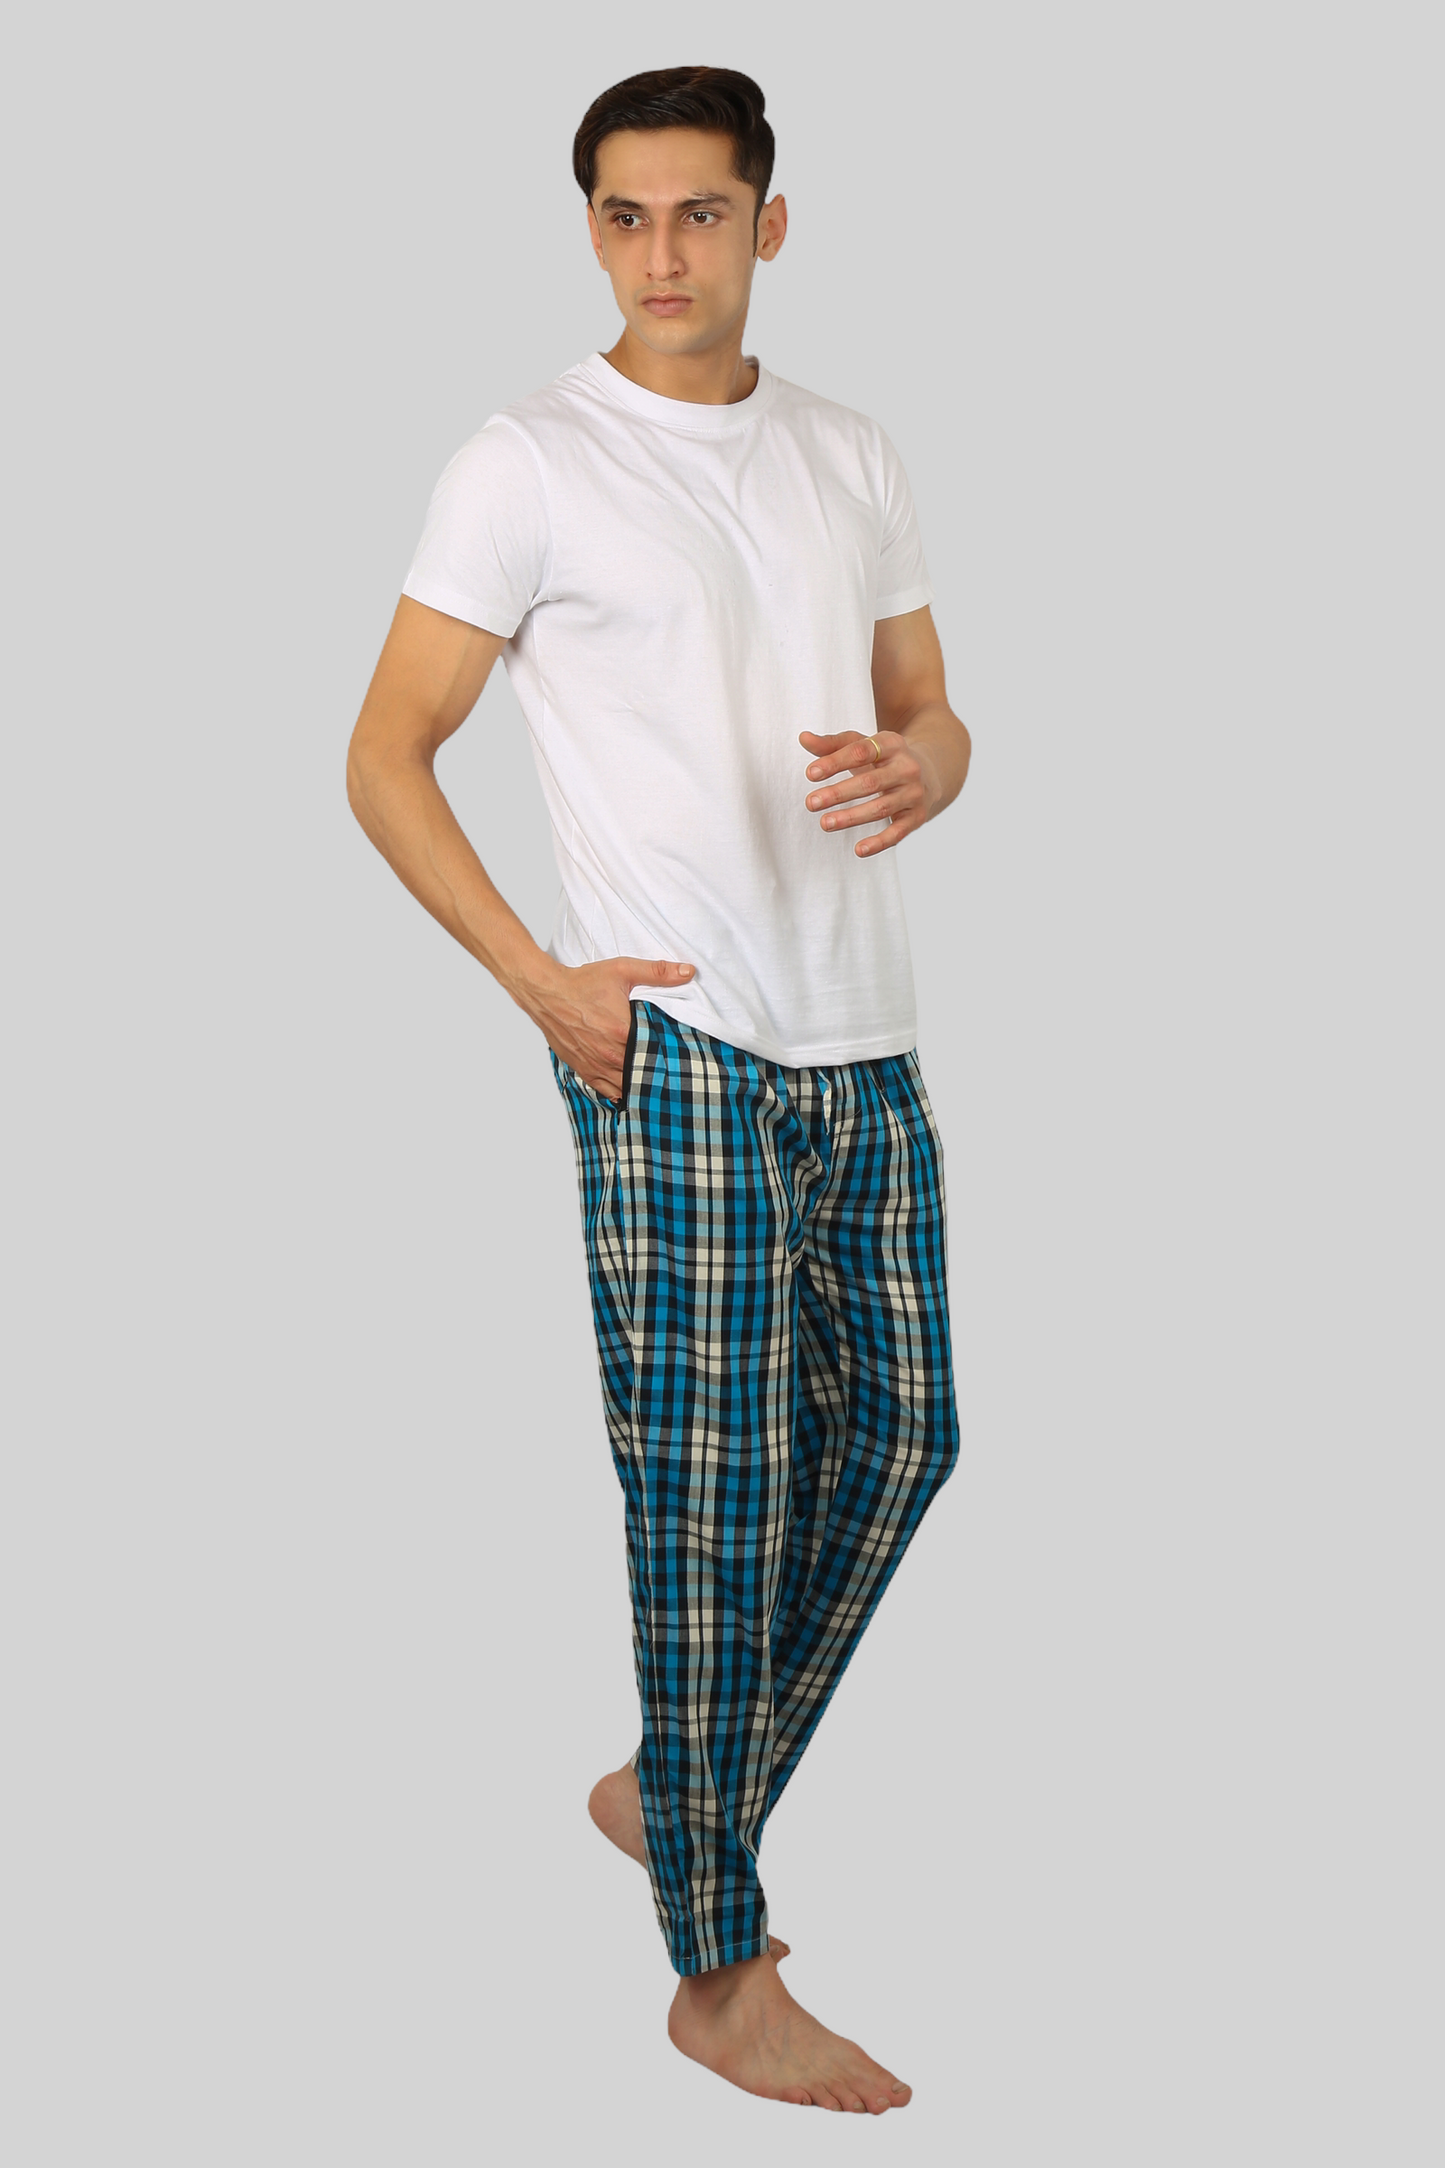 Ocean Blue soft and super comfortable checkered pajamas for men